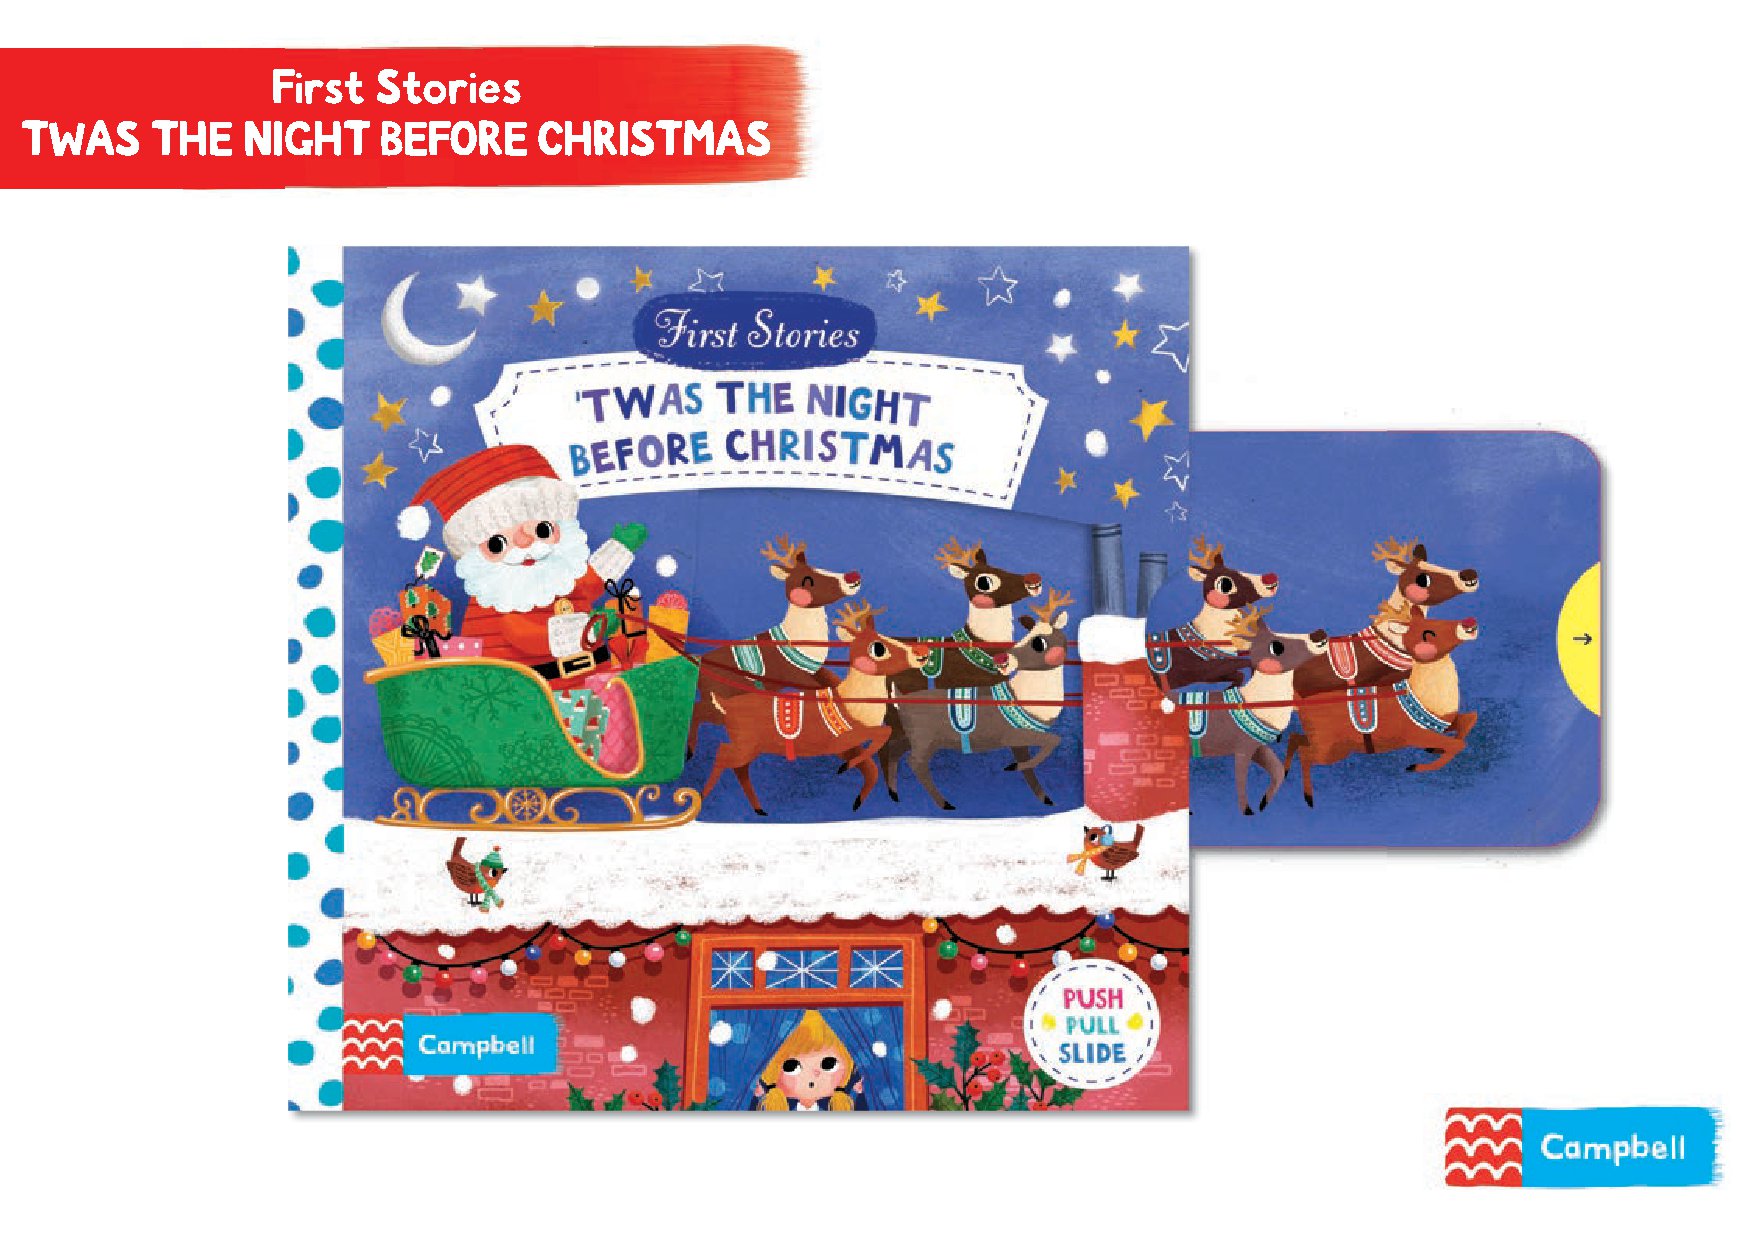 First Stories: Twas the Night Before Christmas